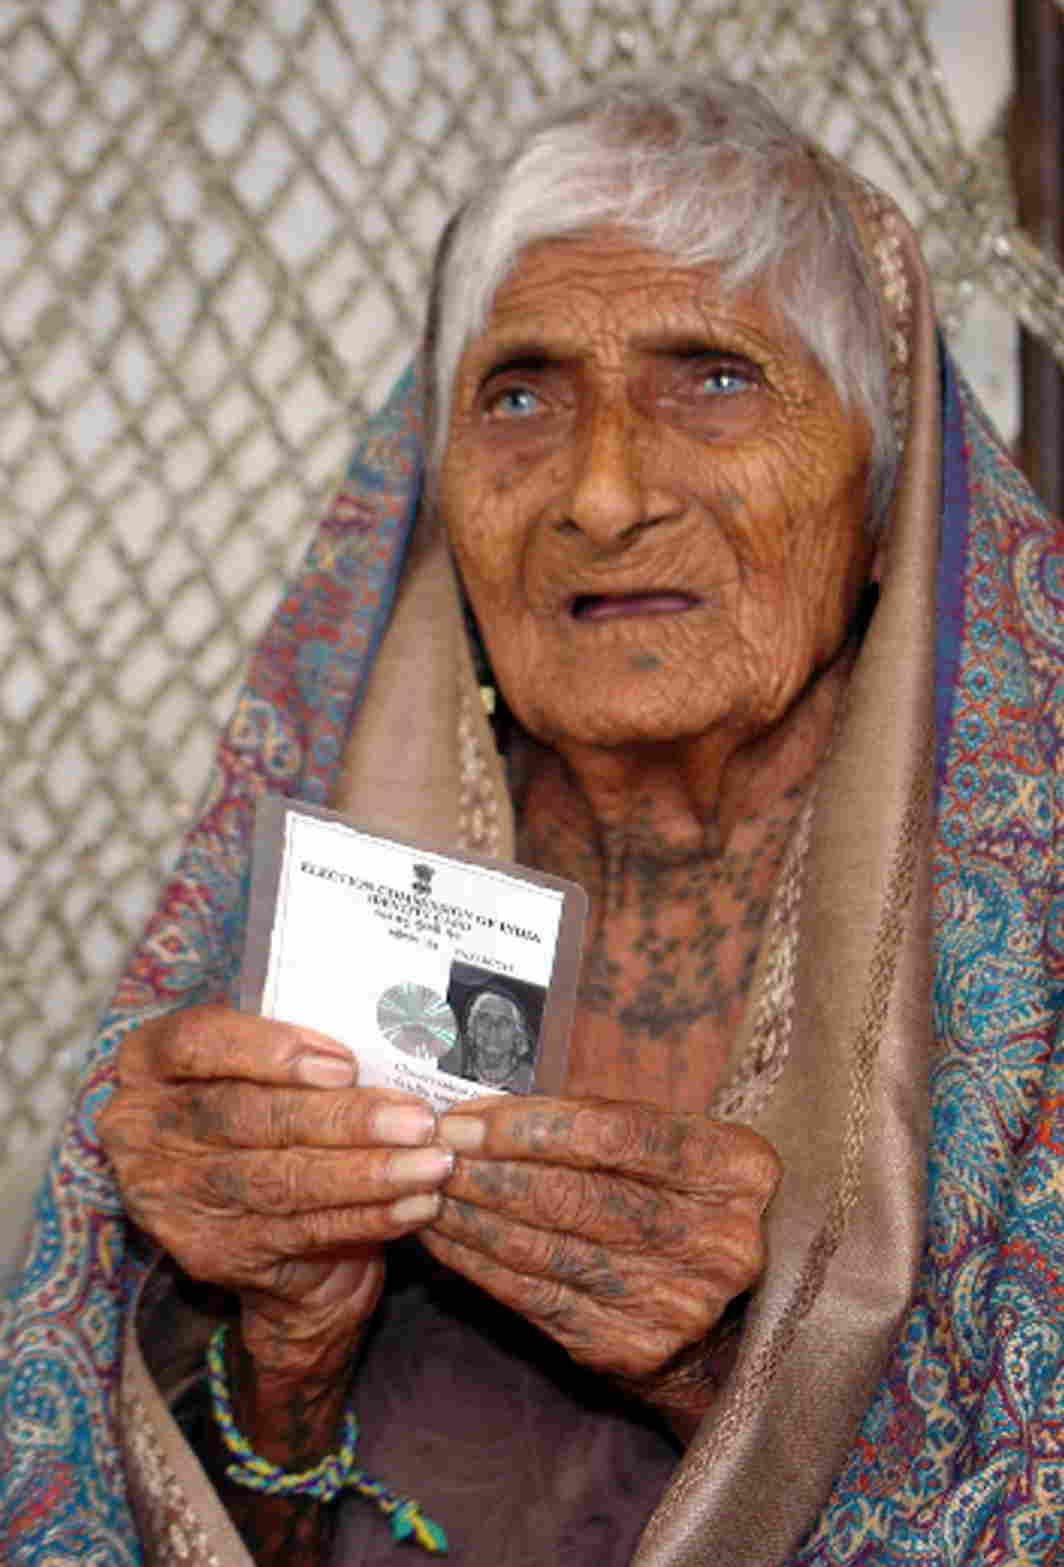 STAR OF THE SHOW: One-hundred-and-twenty-six-year-old Ajiben shows off her voter's identity card at a polling centre prior to casting her vote for the Gujarat assembly election in Rajkot, UNI